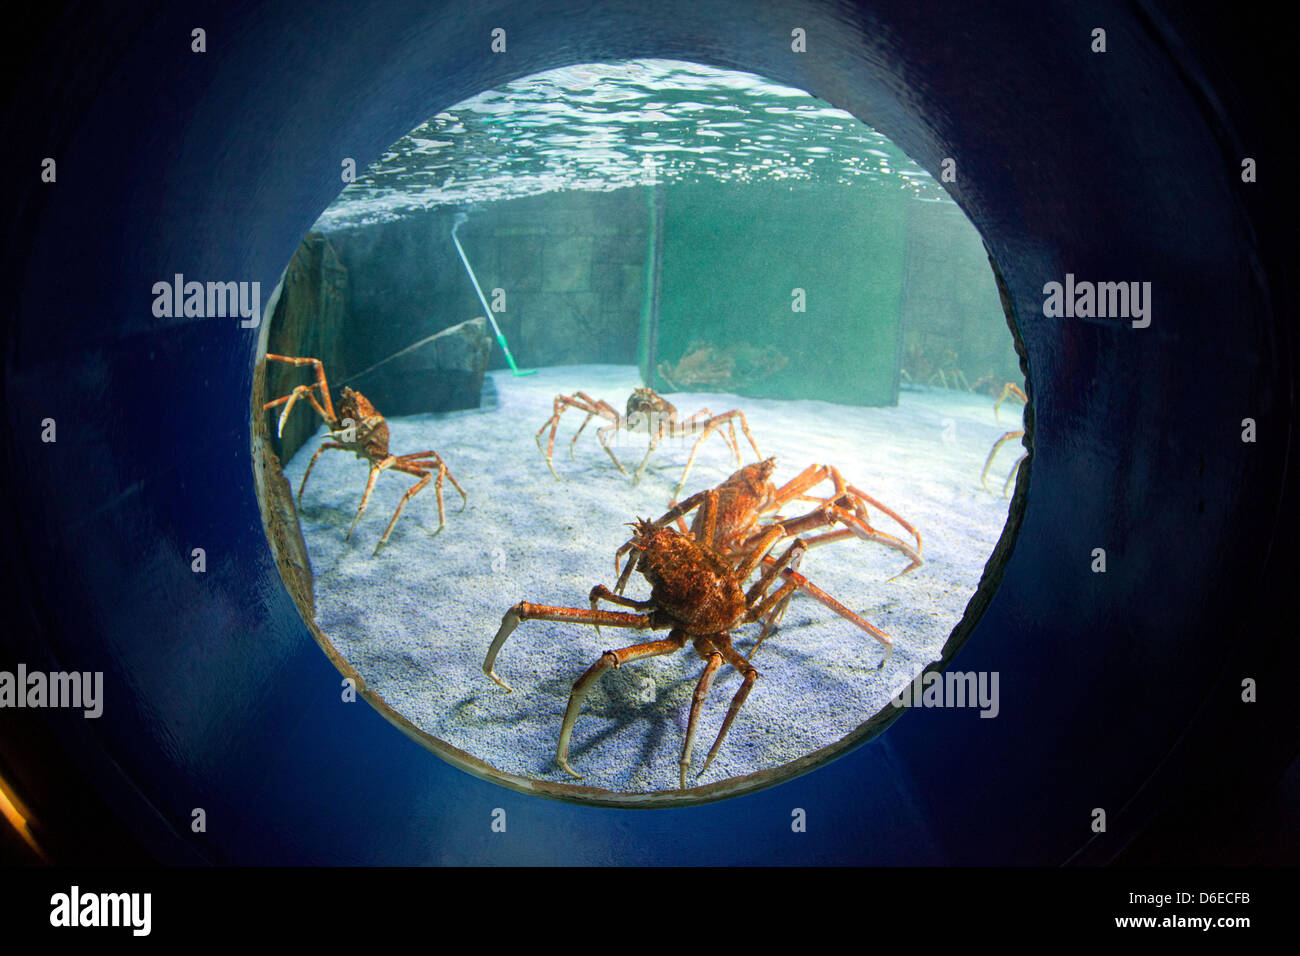 Japanese spider crabs are pictured in its tank at SeaLife Timmendorfer Strand in Timmendorfer Strand, Germany, 25 January 2012. The animals are measured and marked after they shed their skins. The underwaterworld SeaLife opened its doors 15 years ago and houses 2,500 animals in different aquariums with a combined volume of 500,000 litres. Photo: JENS BUETTNER Stock Photo